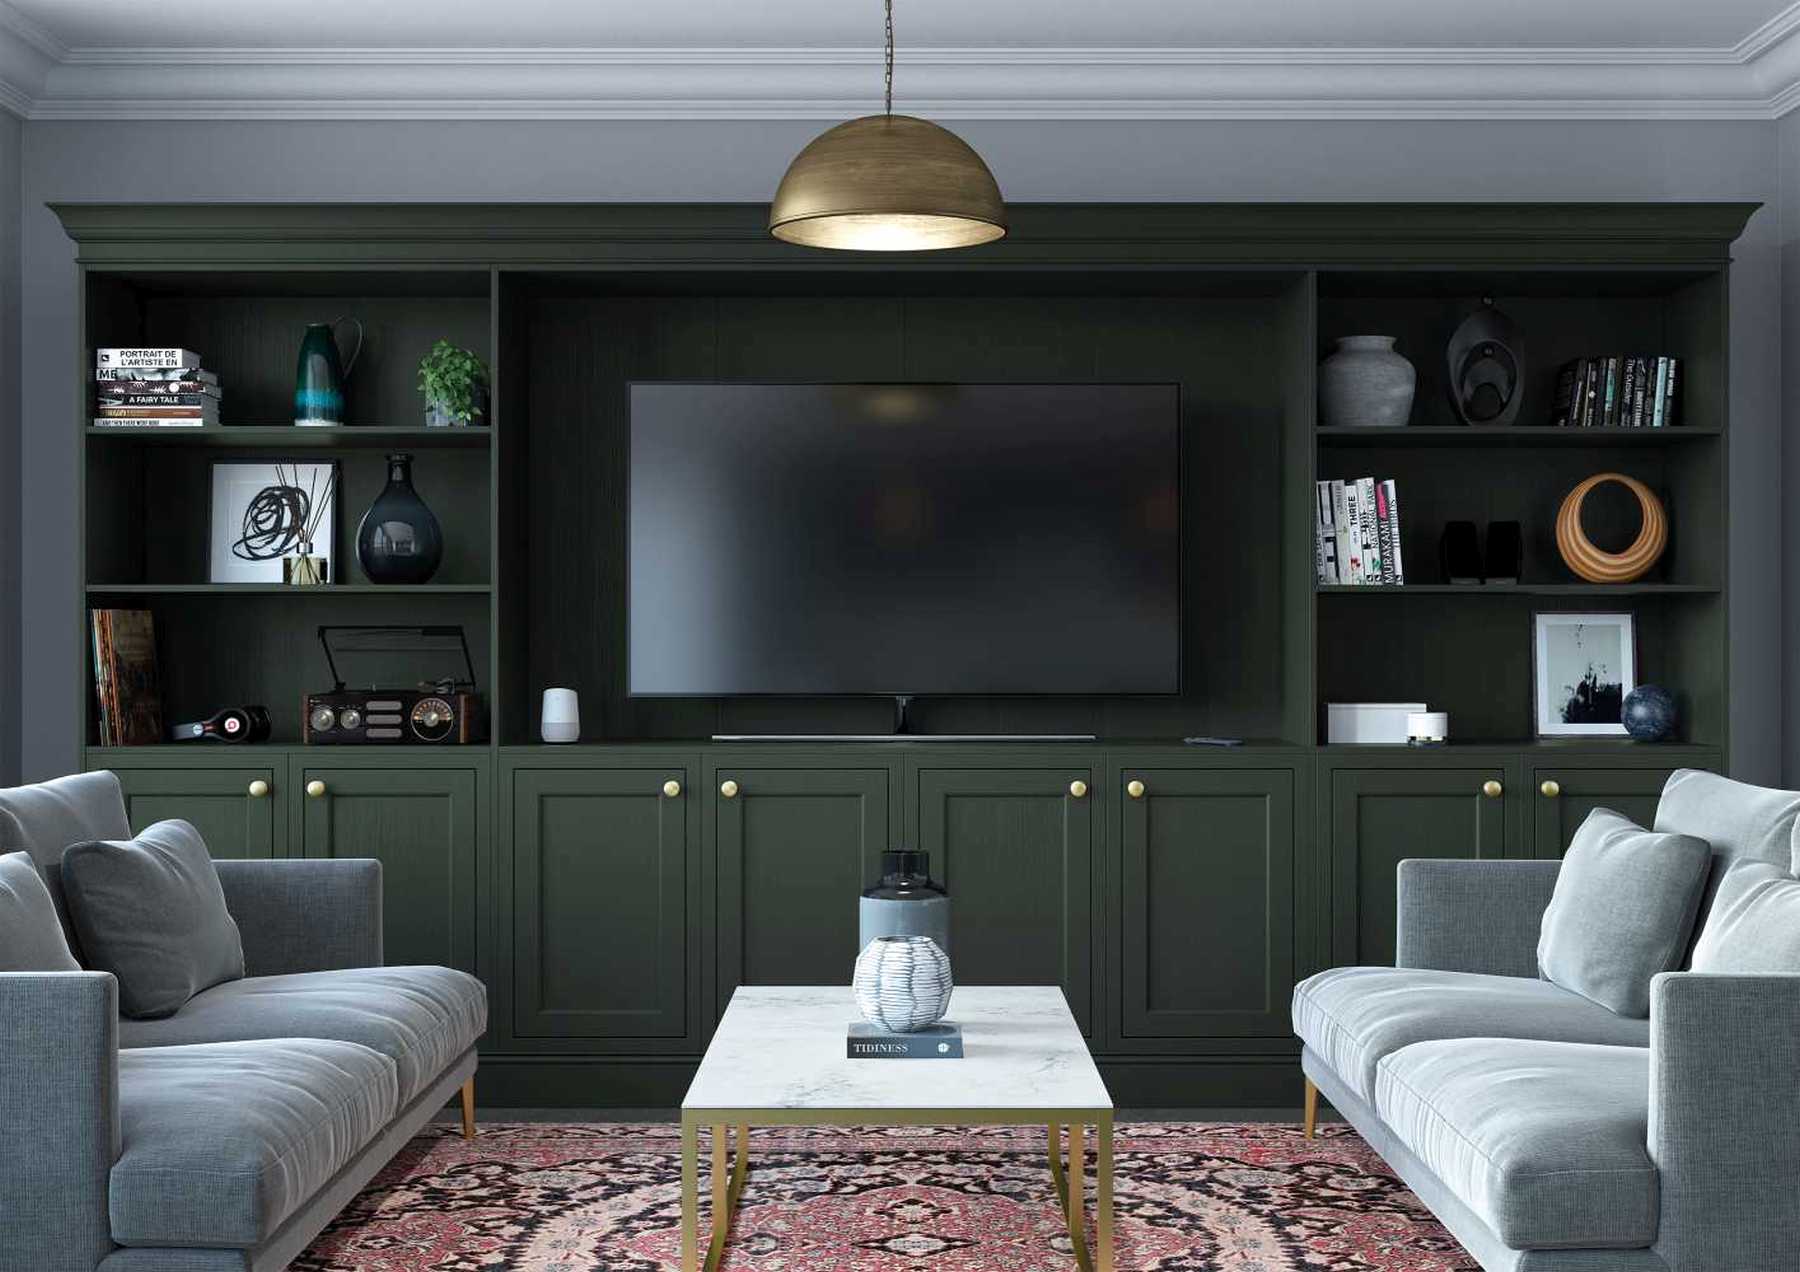 Luxurious inframe kitchen in forest green media wall